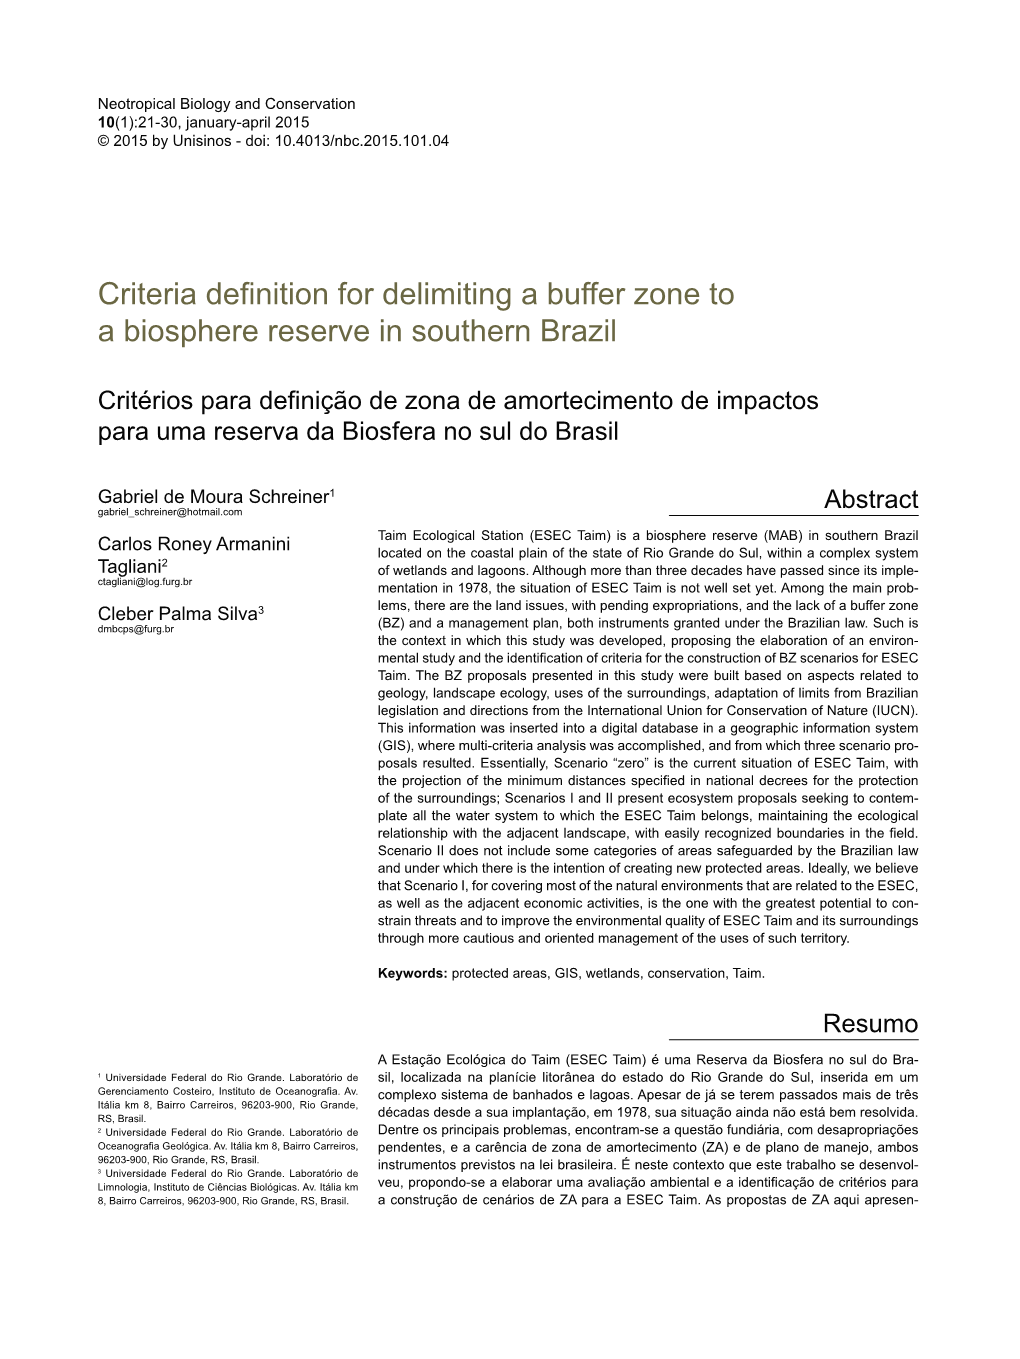 Criteria Definition for Delimiting a Buffer Zone to a Biosphere Reserve in Southern Brazil